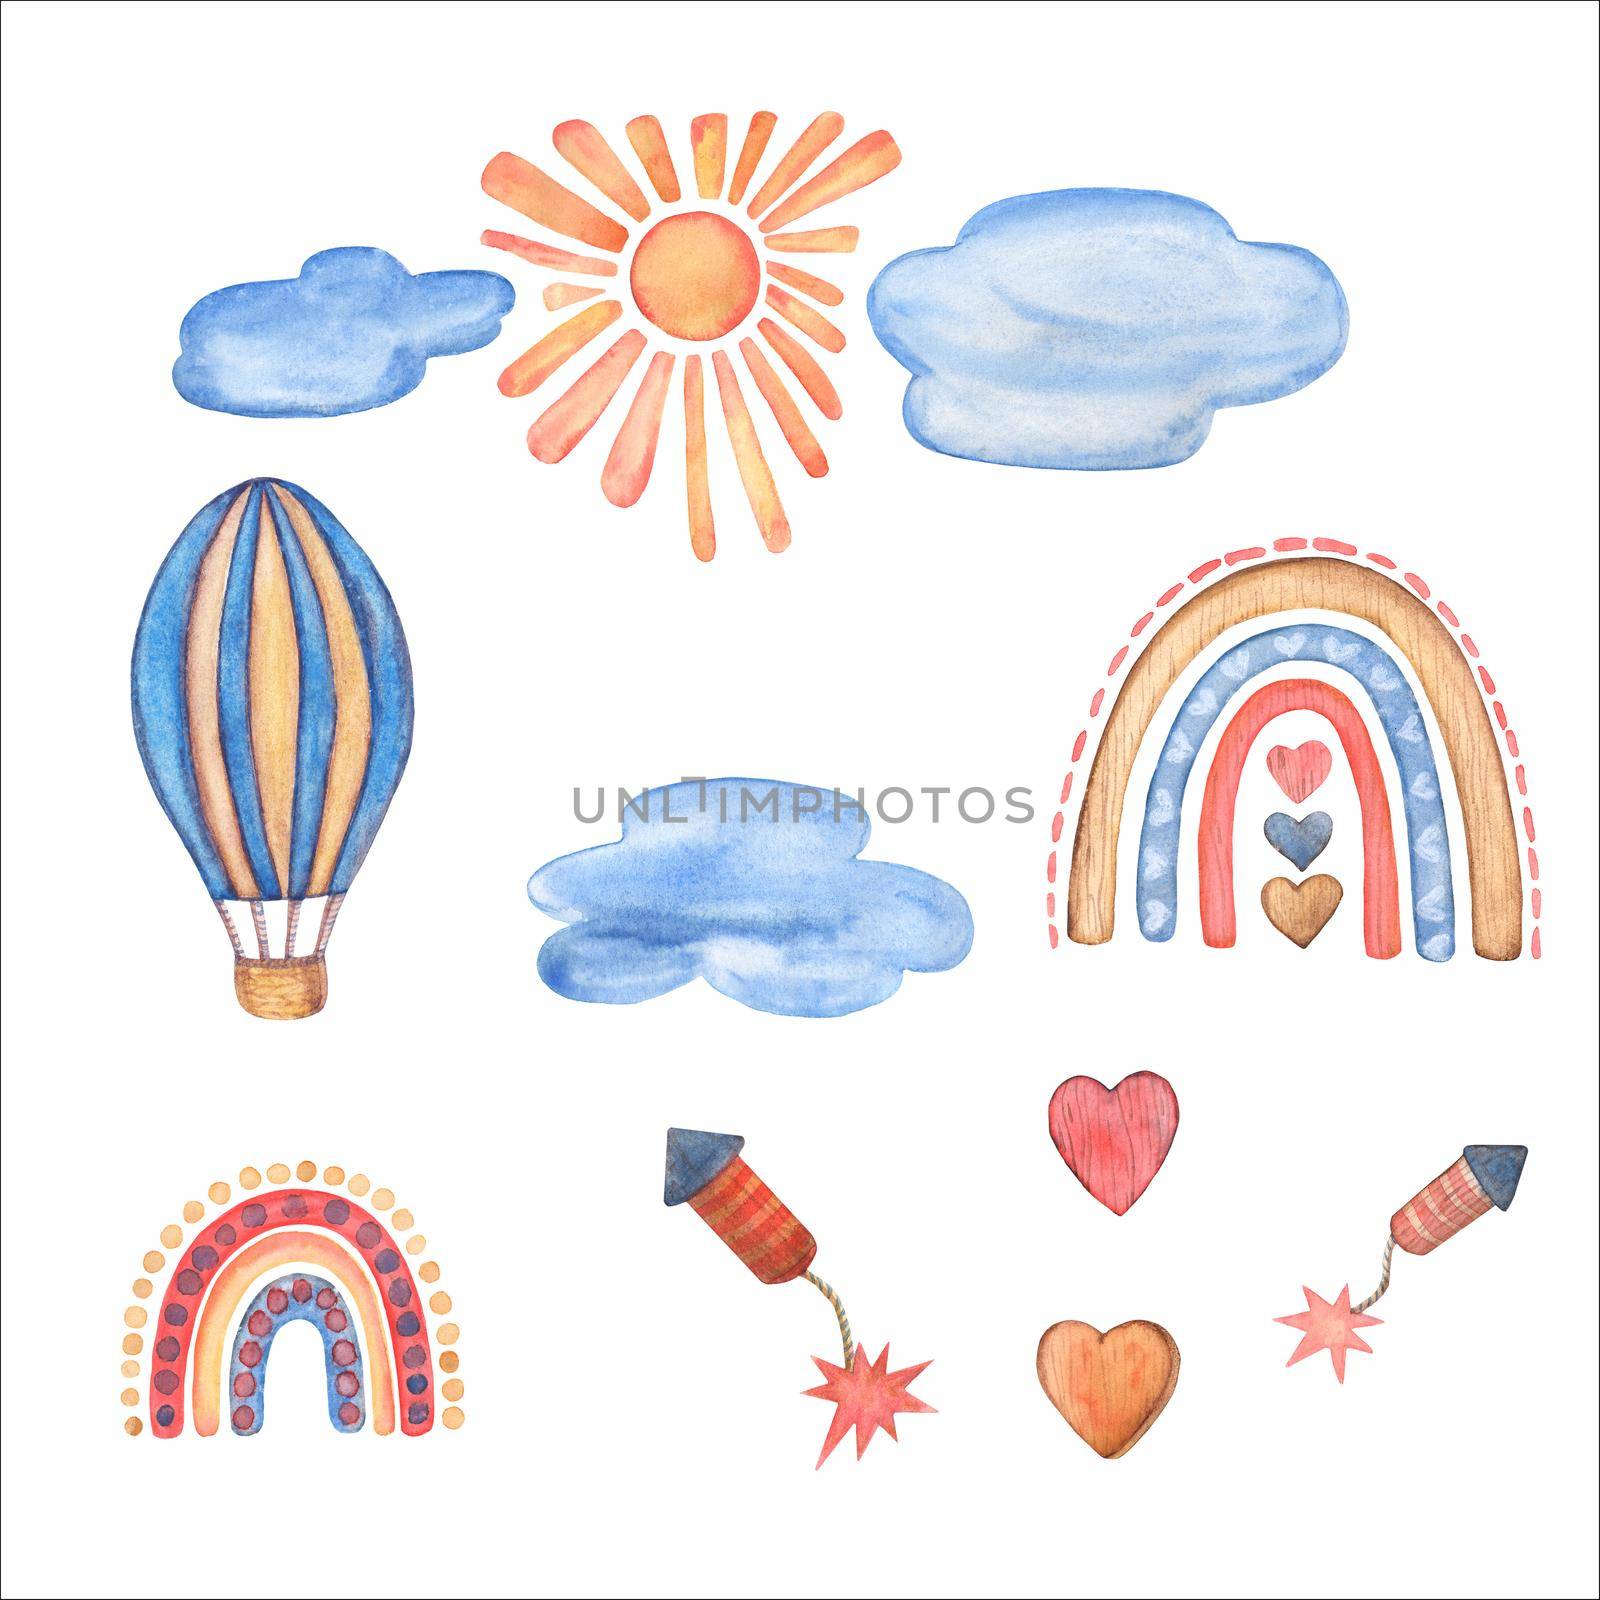 Fly in the sky Watercolor Clipart. Kids Wooden toys. hot air balloon, rainbow, clode, sun, heart, fireworks. Nursery Hand-drawn Art Decor. Baby boy. Set Illustrations Isolated on white background.